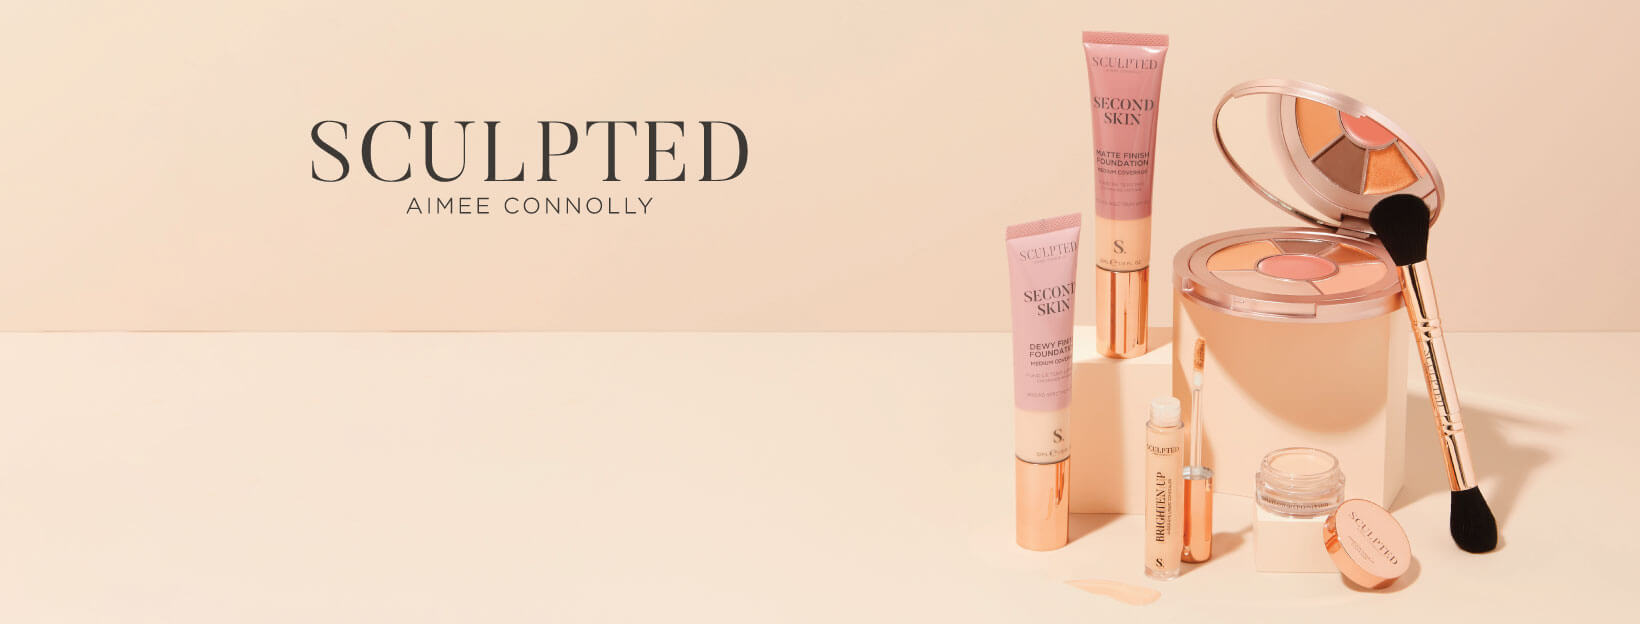 Aimee Connolly Cosmetics offers